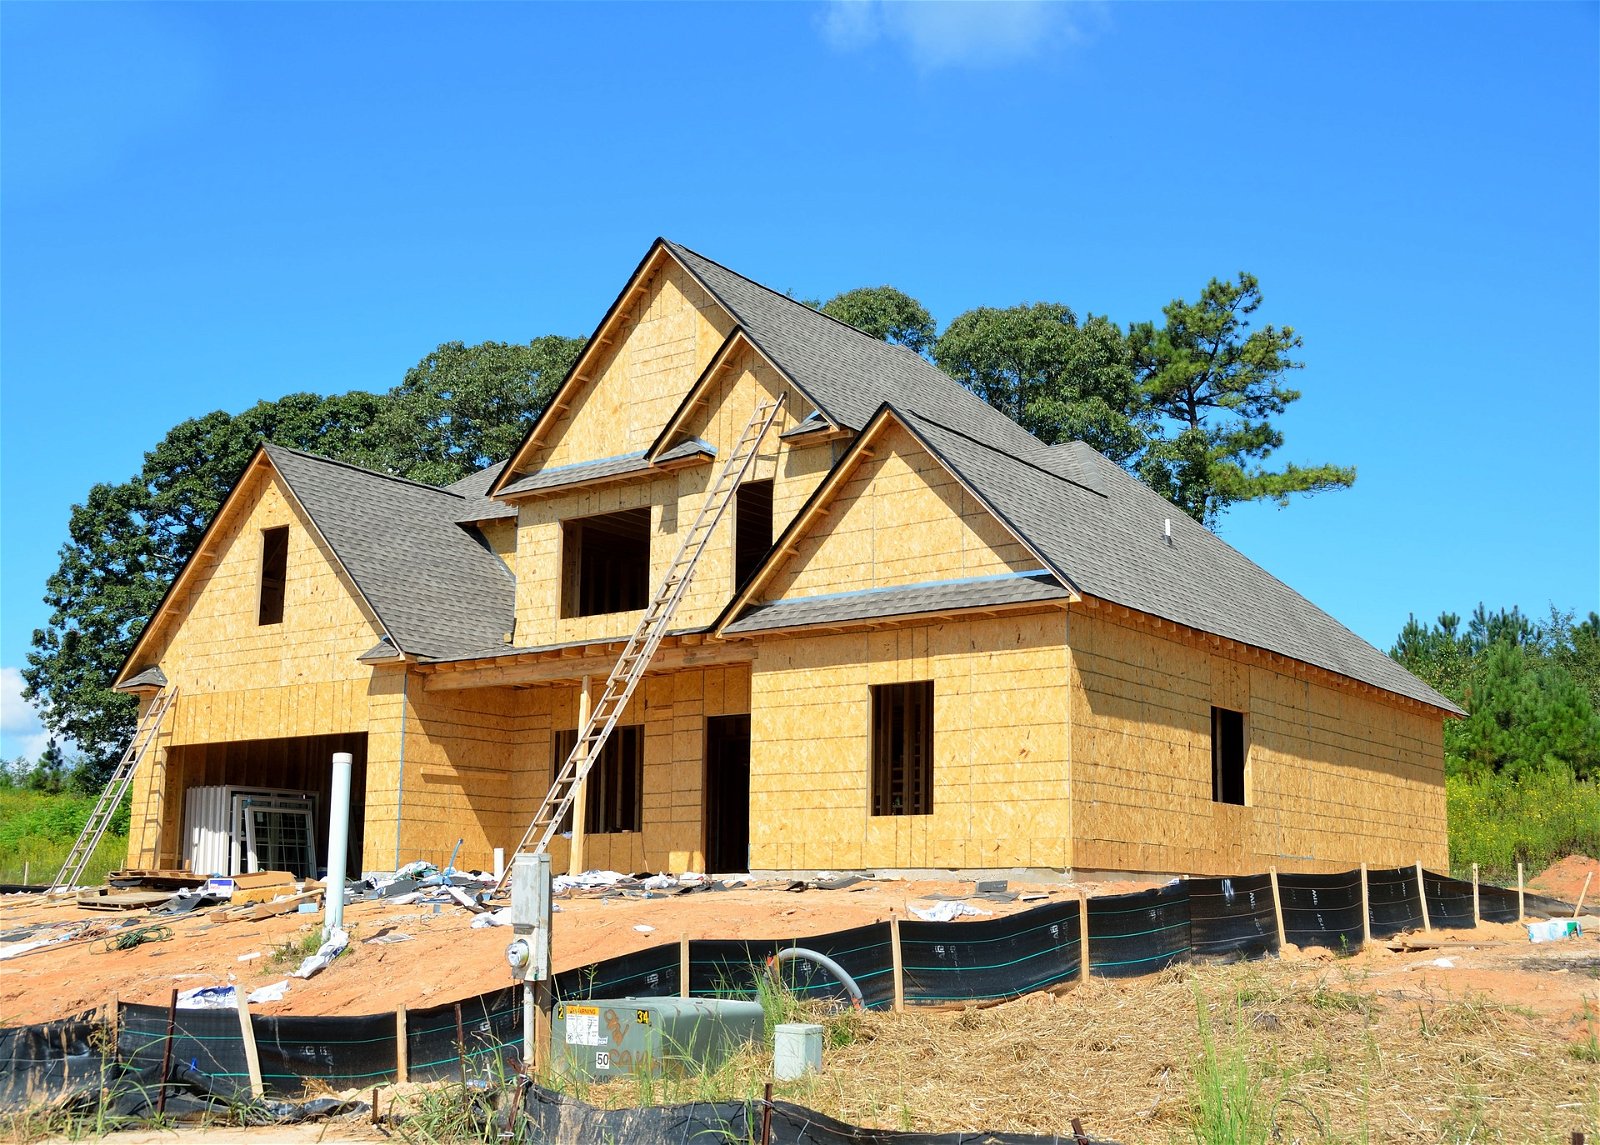 Who Are Largest U.S. Homebuilders? | South Carolina Home To Top Four Biggest Builders | Steinberg Law Firm